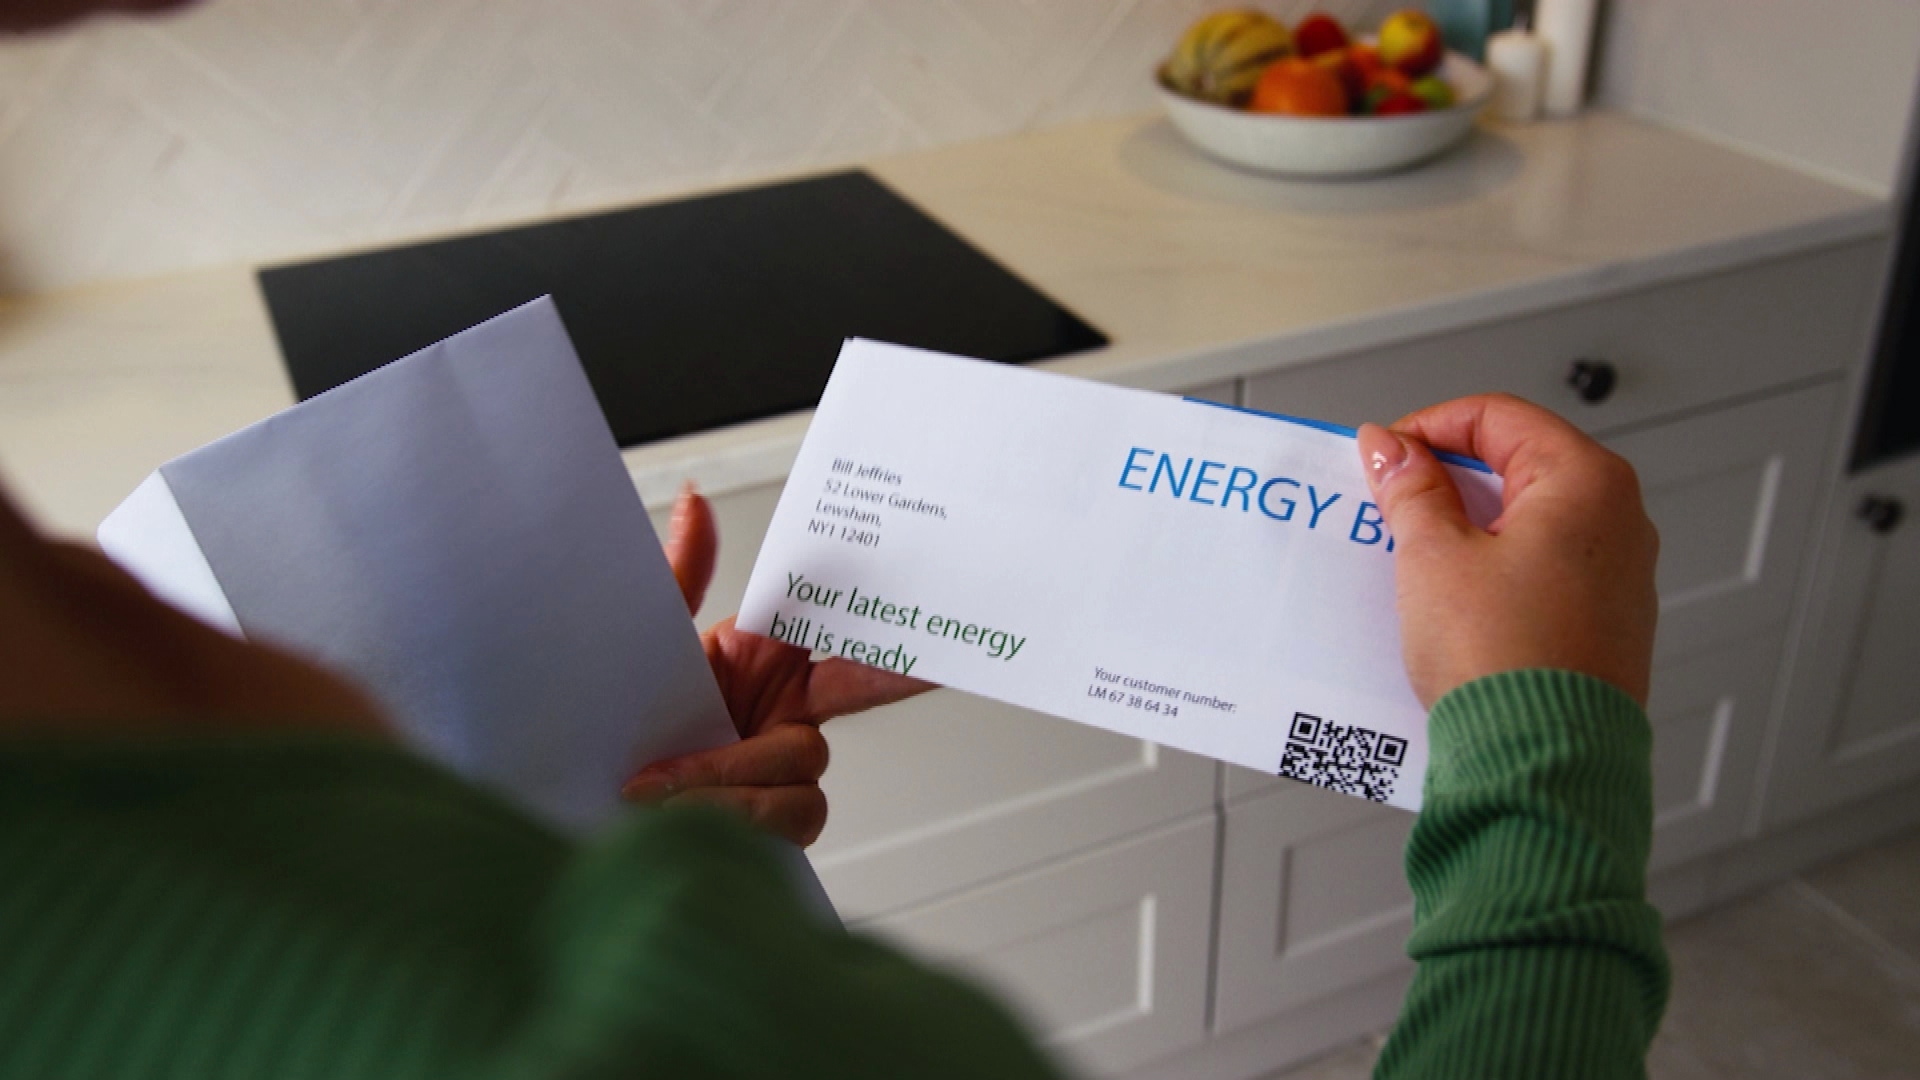 Thousands of customers signing up for energy bill relief